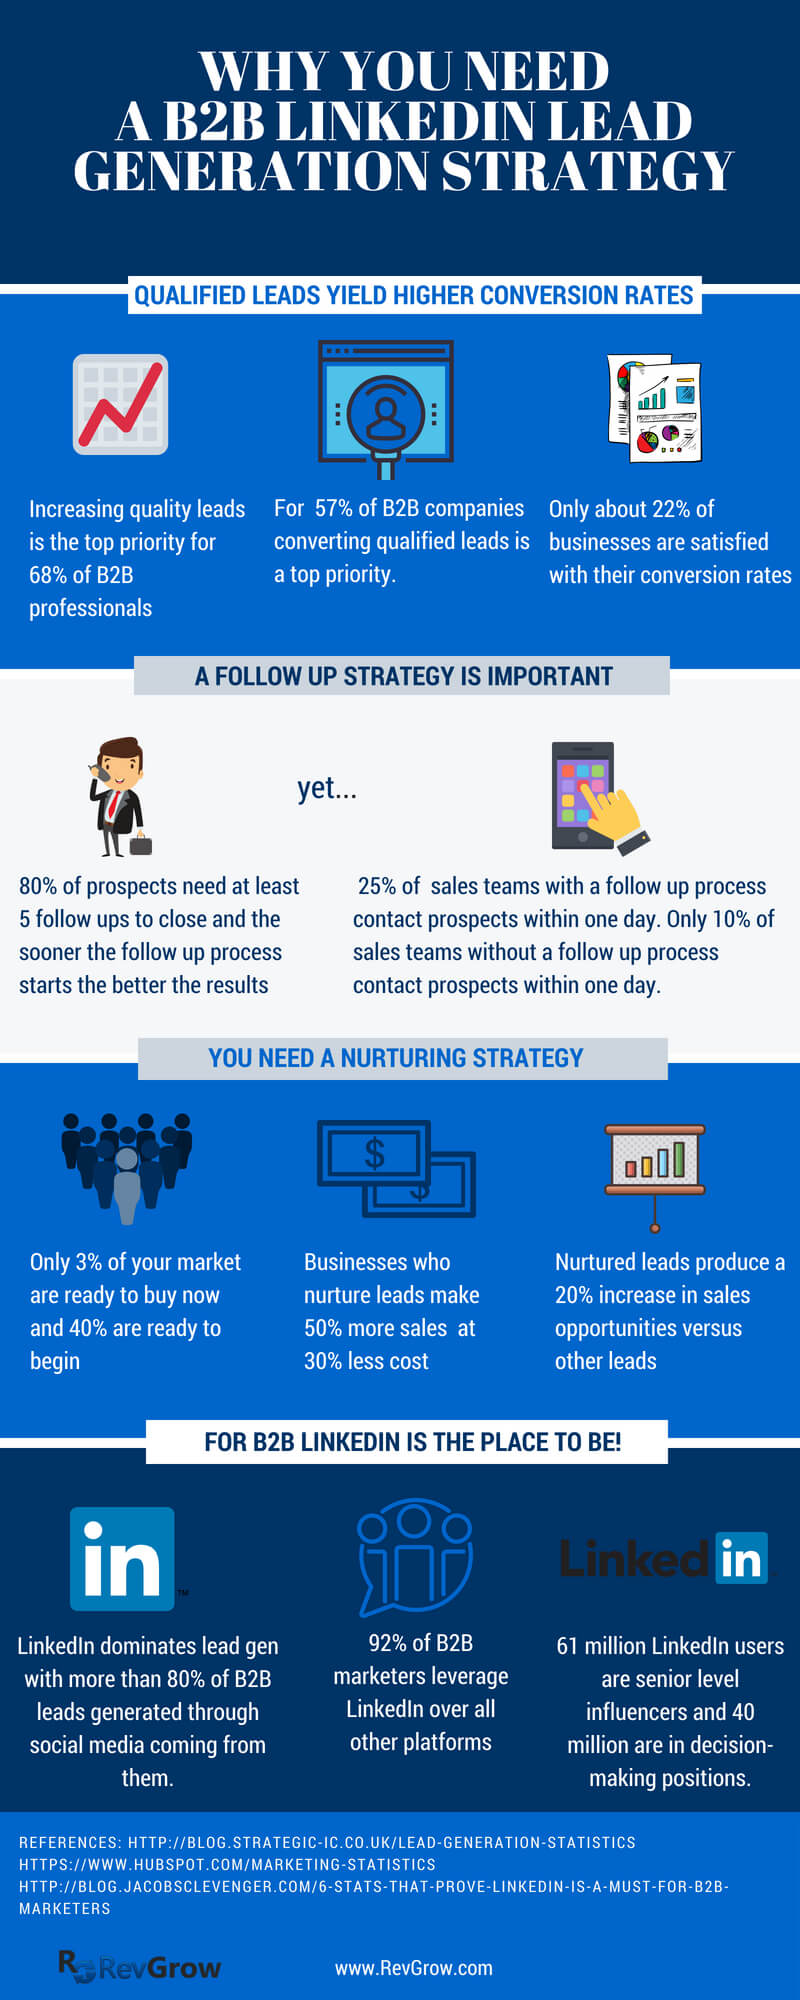 Why You Need a B2B LinkedIn Lead Generation Strategy Graphic